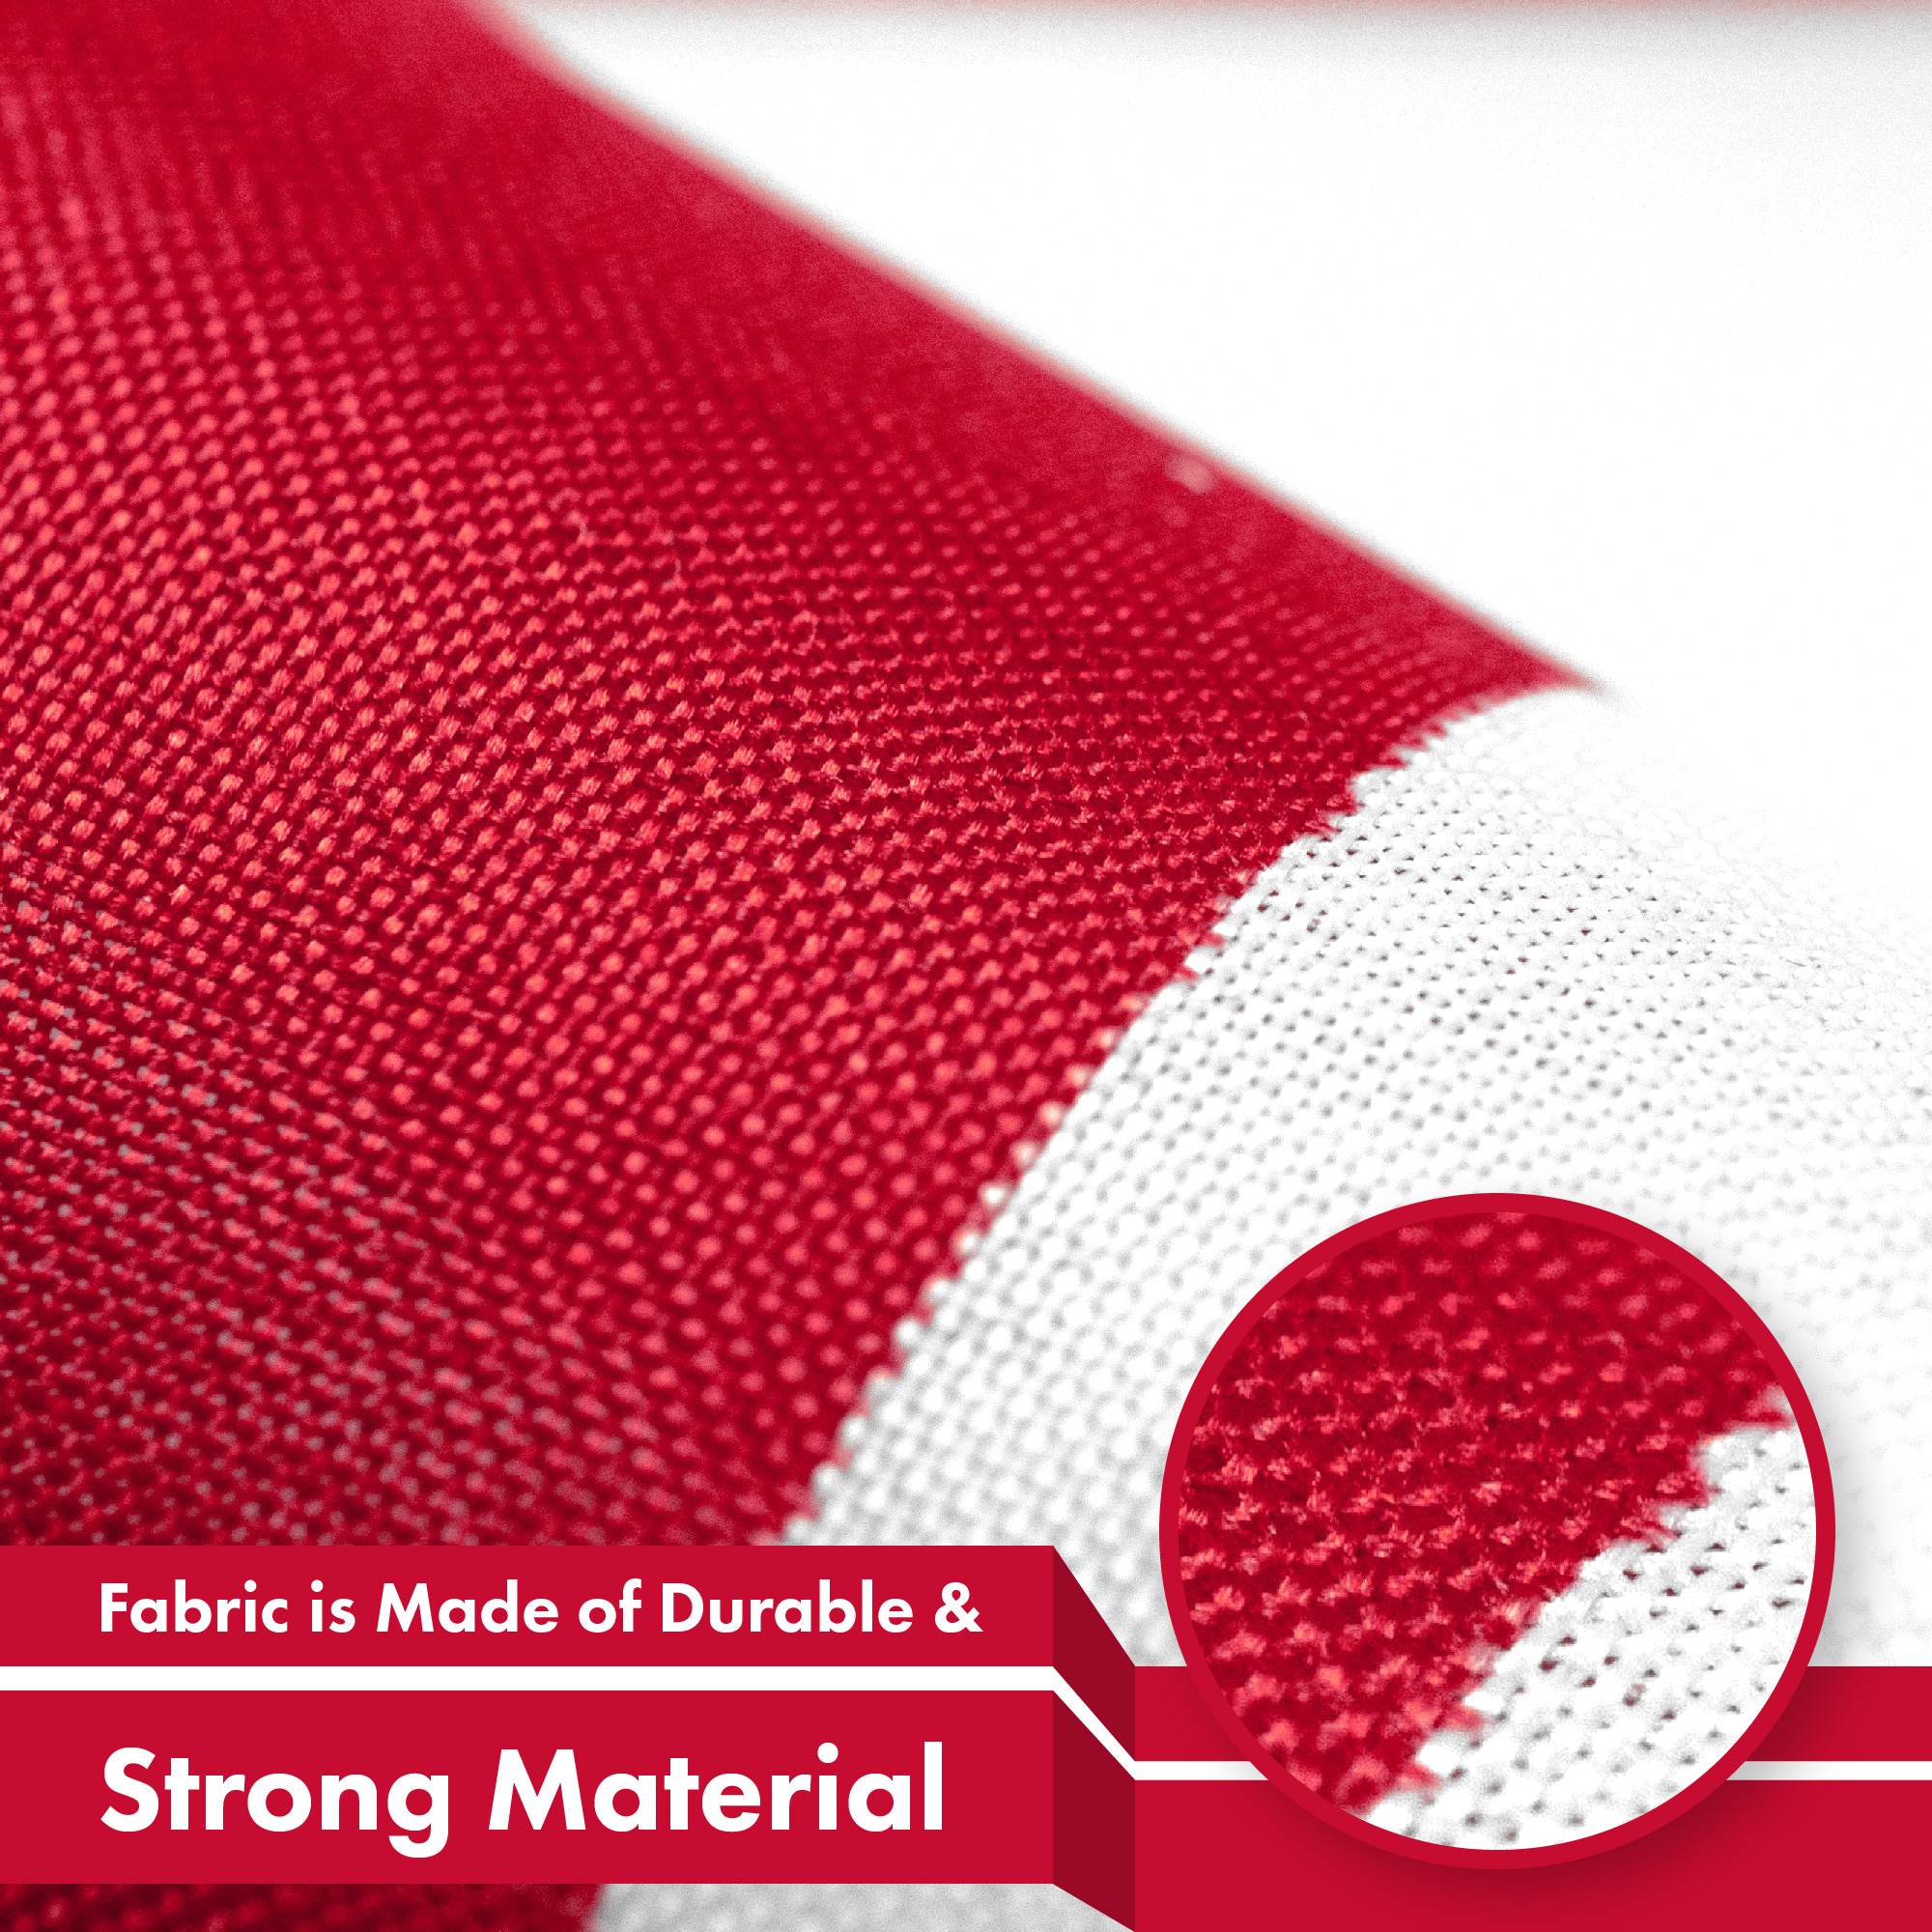 Denmark Danish Flag 3x5FT 10-Pack 150D Printed Polyester By G128 - image 5 of 7